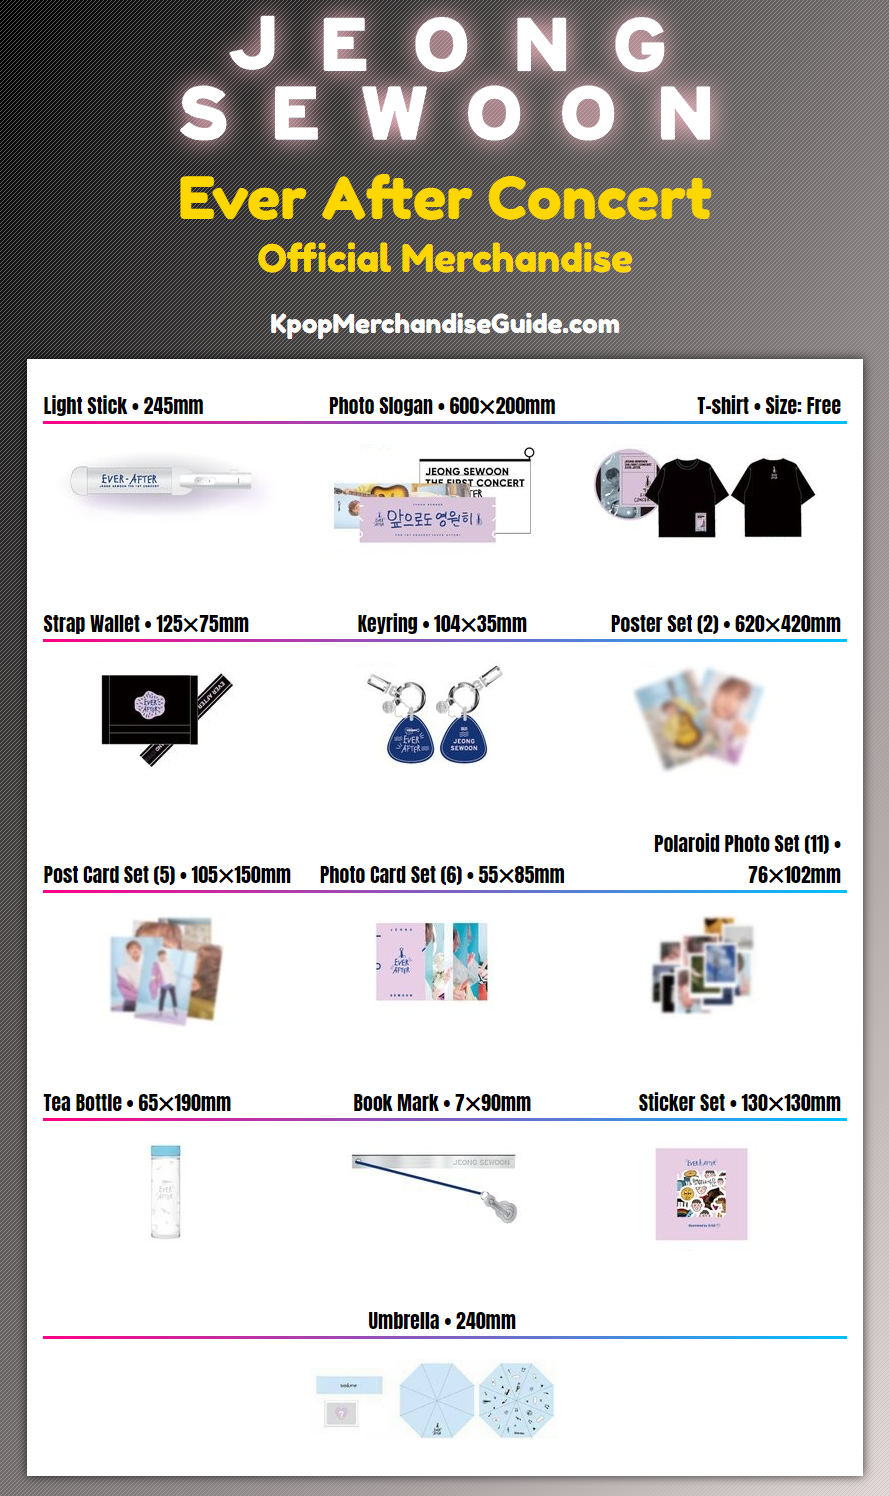 Jeong Se Woon Ever After Concert Merchandise